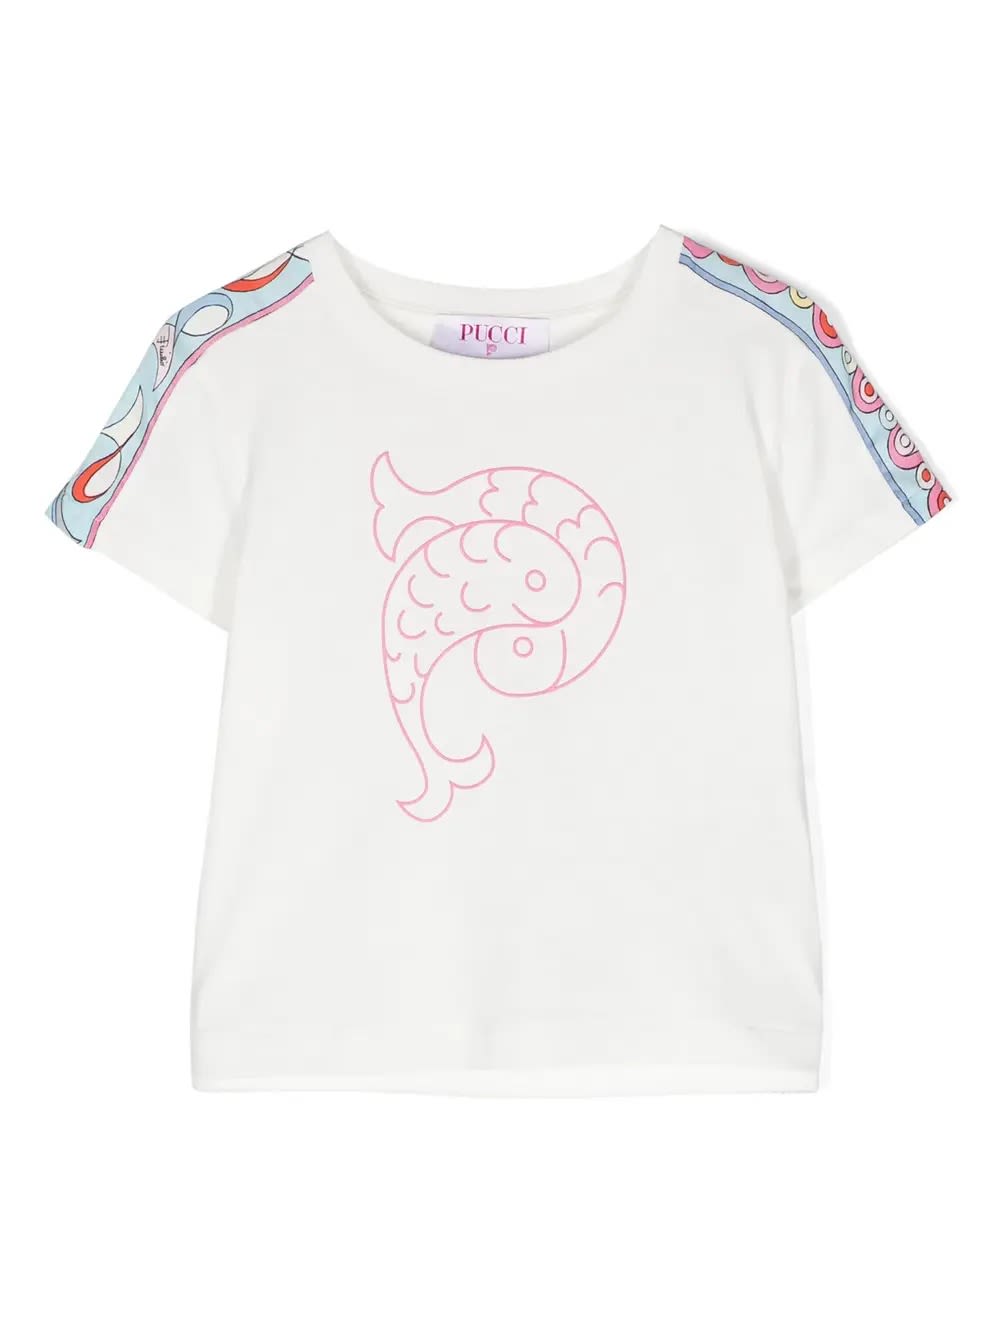 Pucci Kids' White T-shirt With  P Print And Printed Ribbons